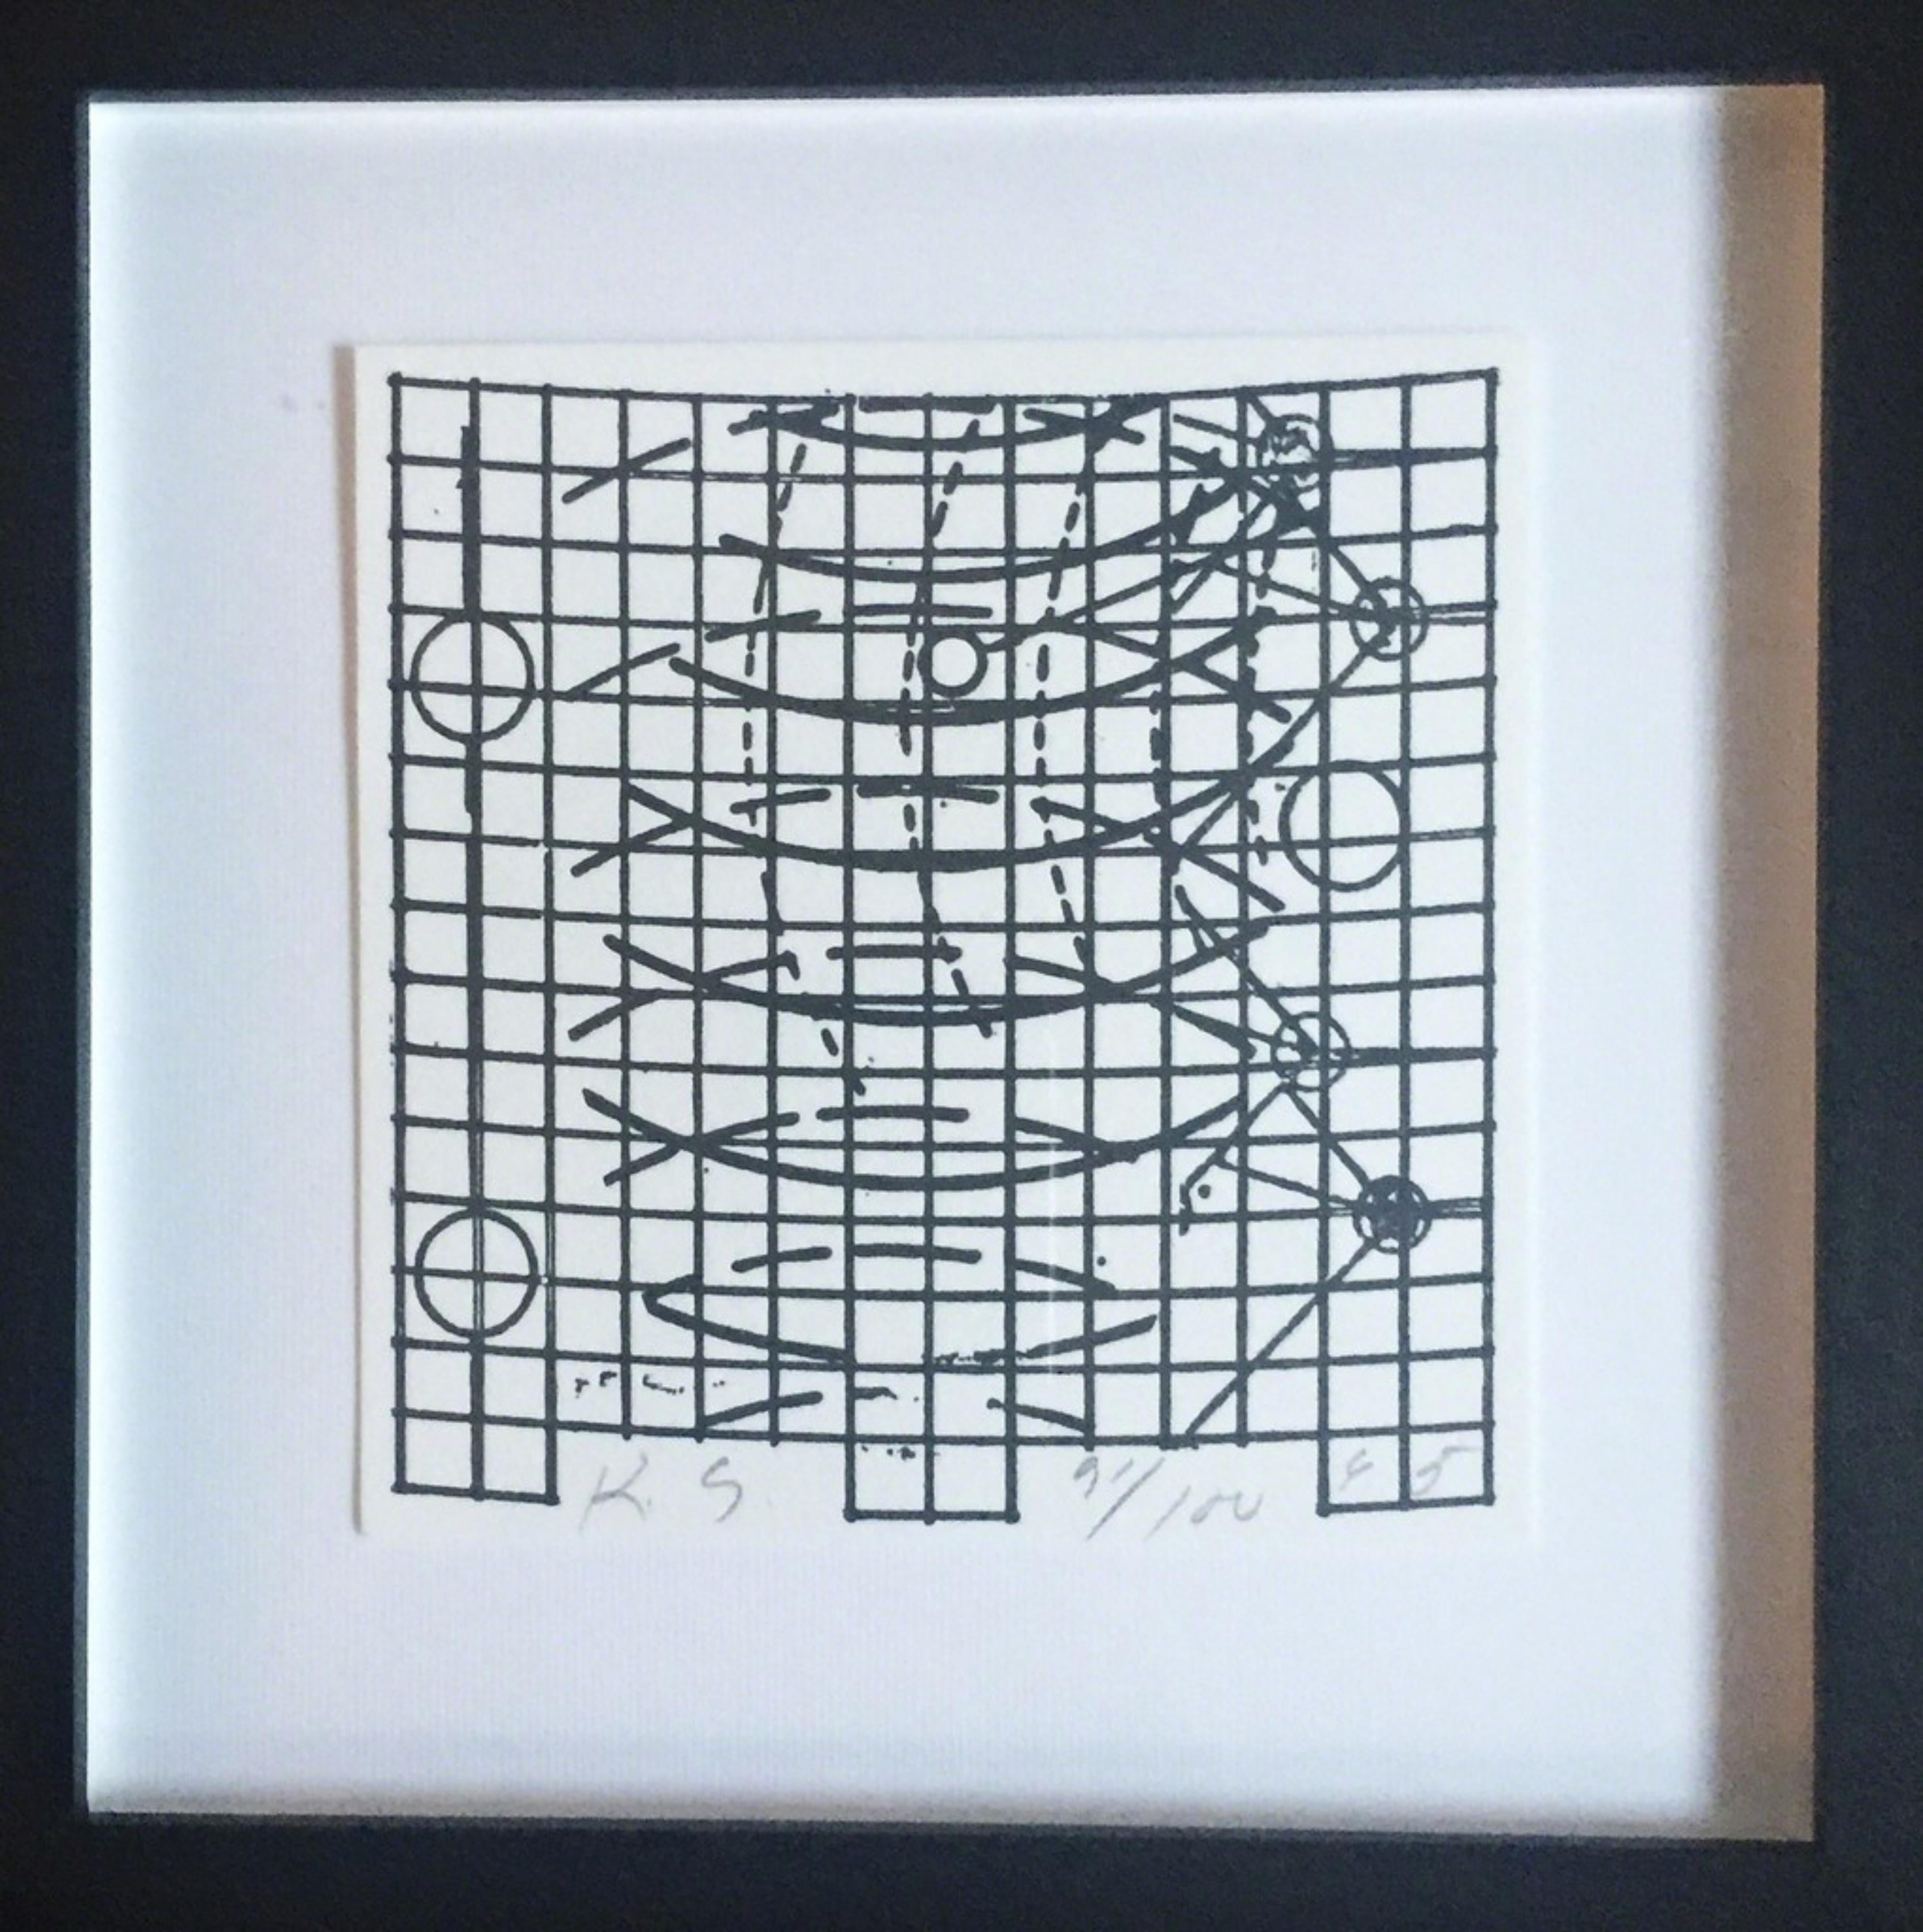 Keith Sonnier Abstract Print - Untitled limited edition signed abstract geometric print by renowned sculptor